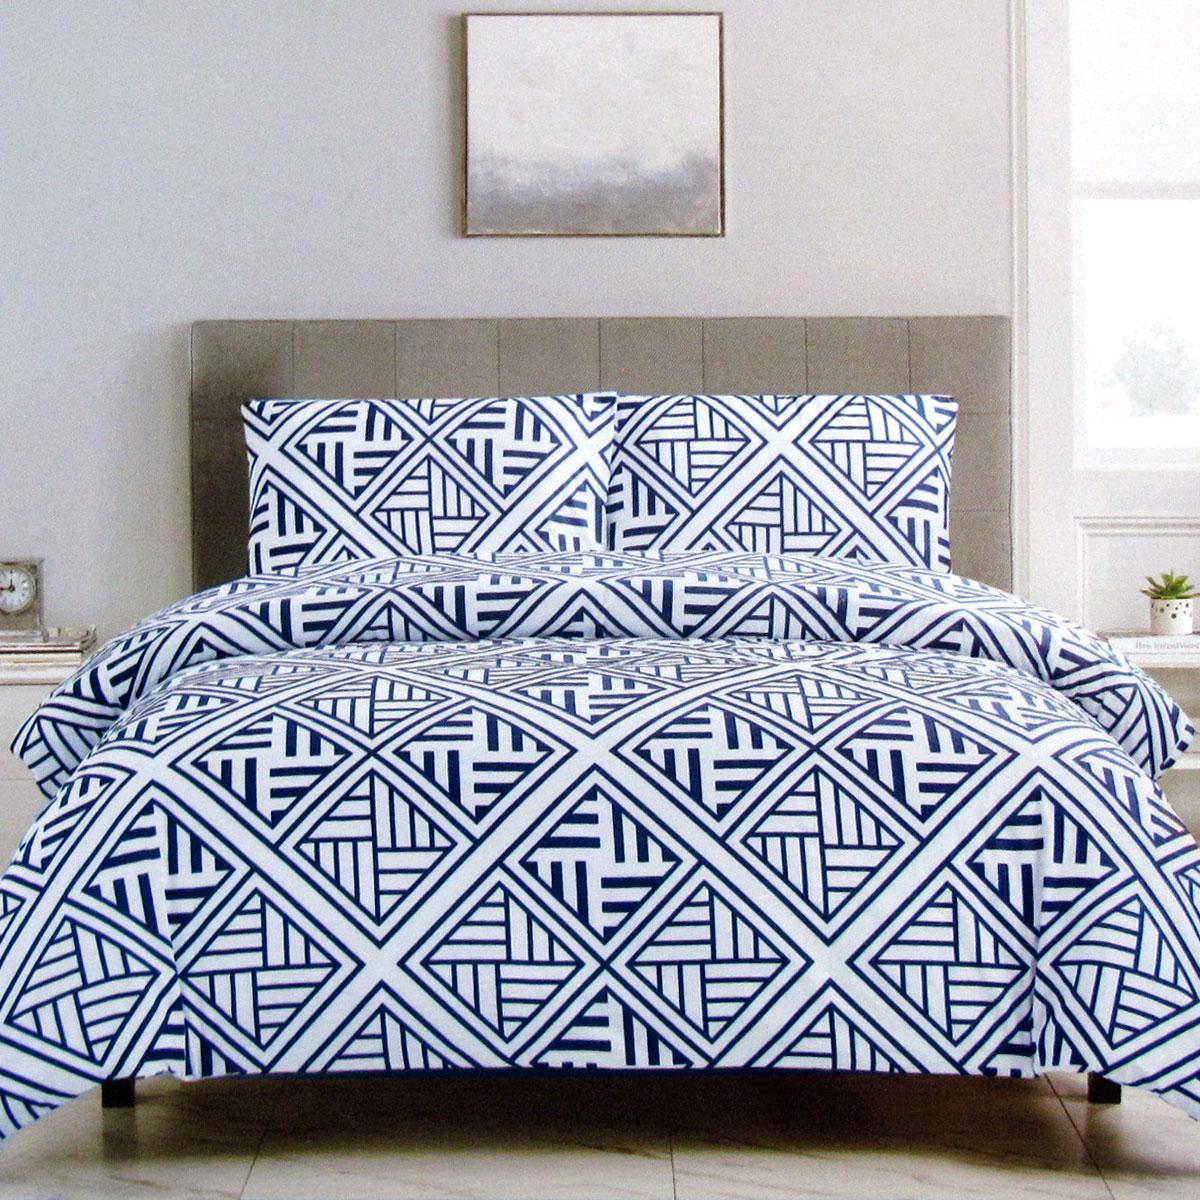 Artex Navy Enzi Geometric Pattern Printed Microfiber Polyester Quilt Cover Set Double